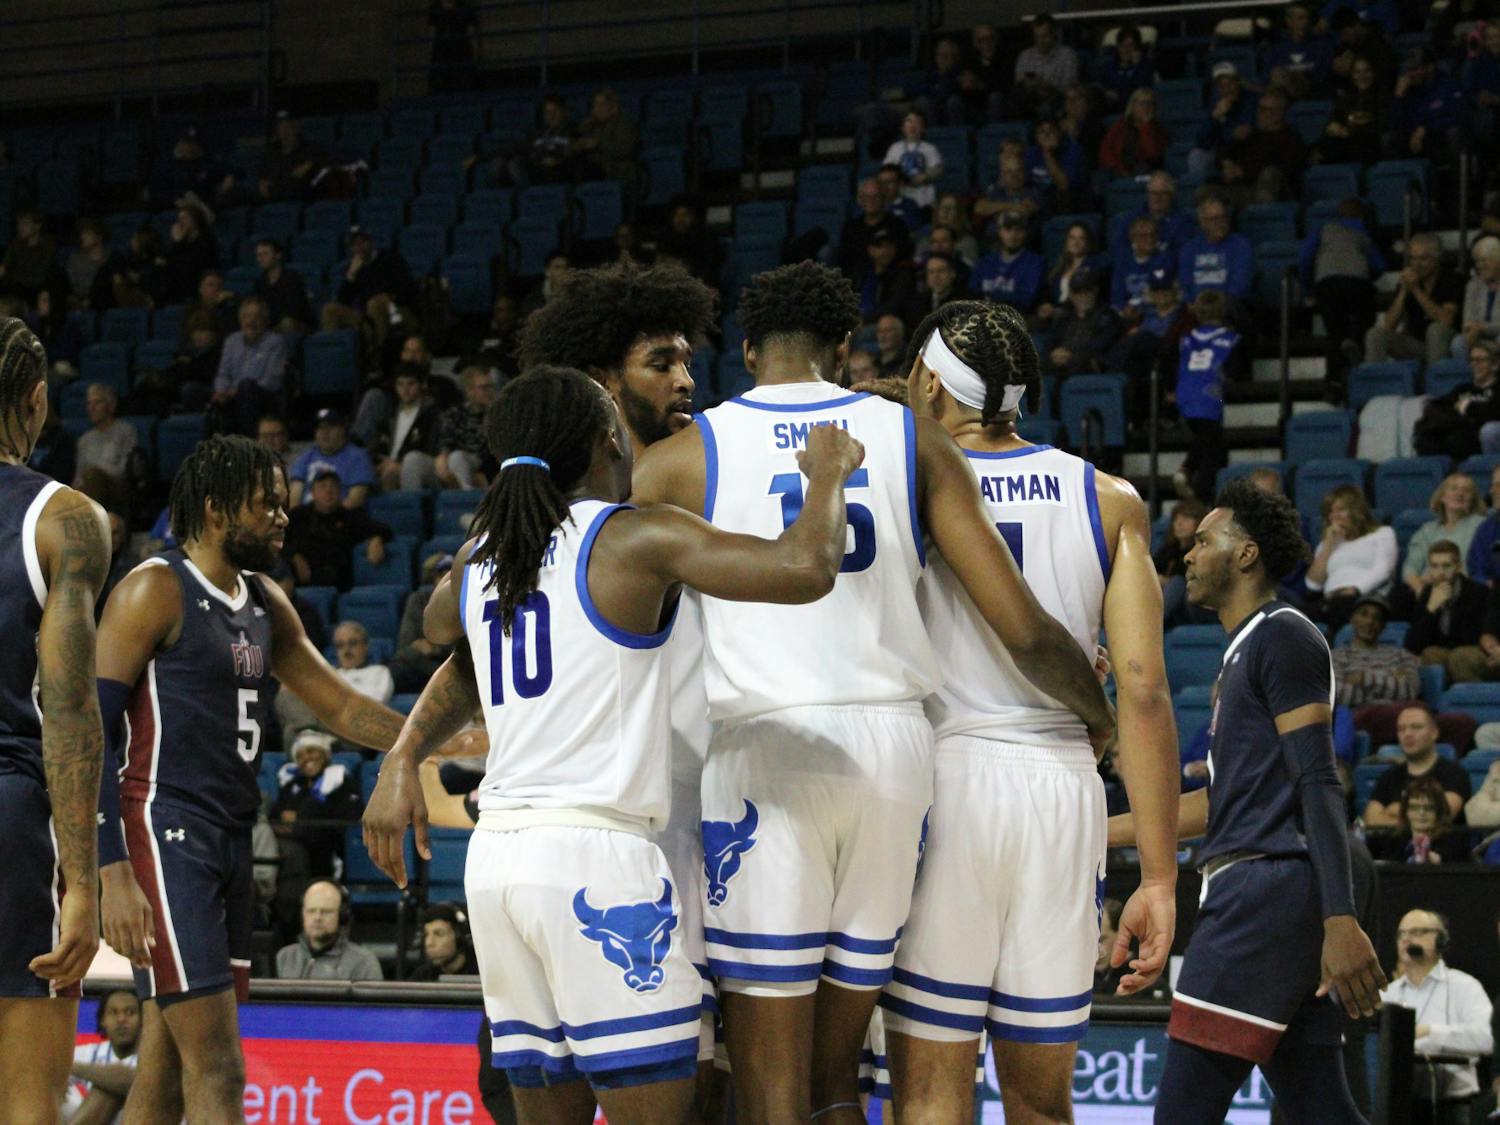 UB men's basketball picked up its first D-I win of the season against Central Michigan on Tuesday.